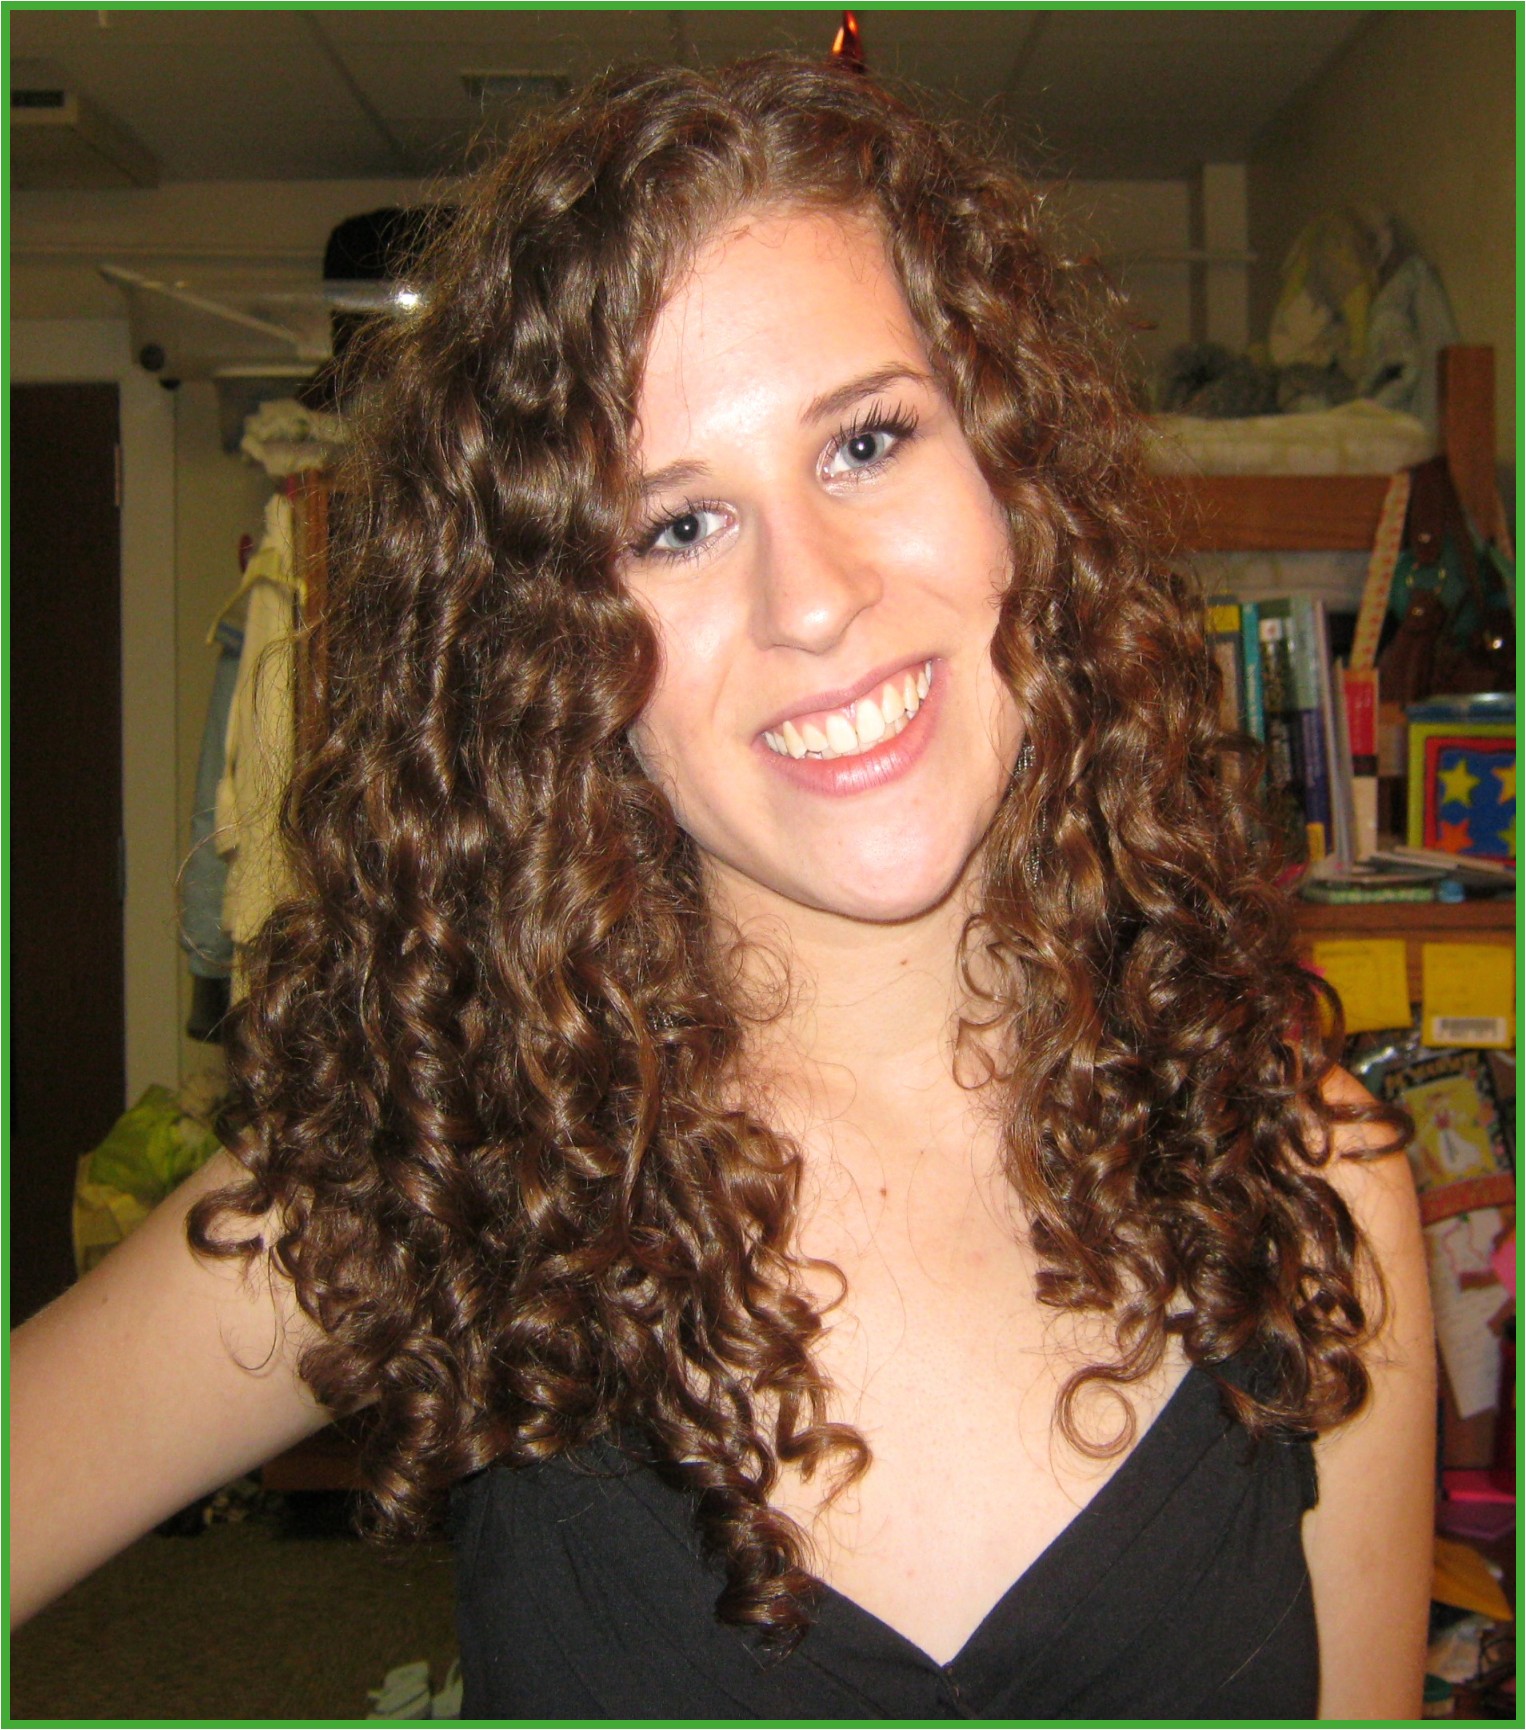 Hairstyles for Going to A Wedding Luxury Exciting Very Curly Hairstyles Fresh Curly Hair 0d Archives Hair